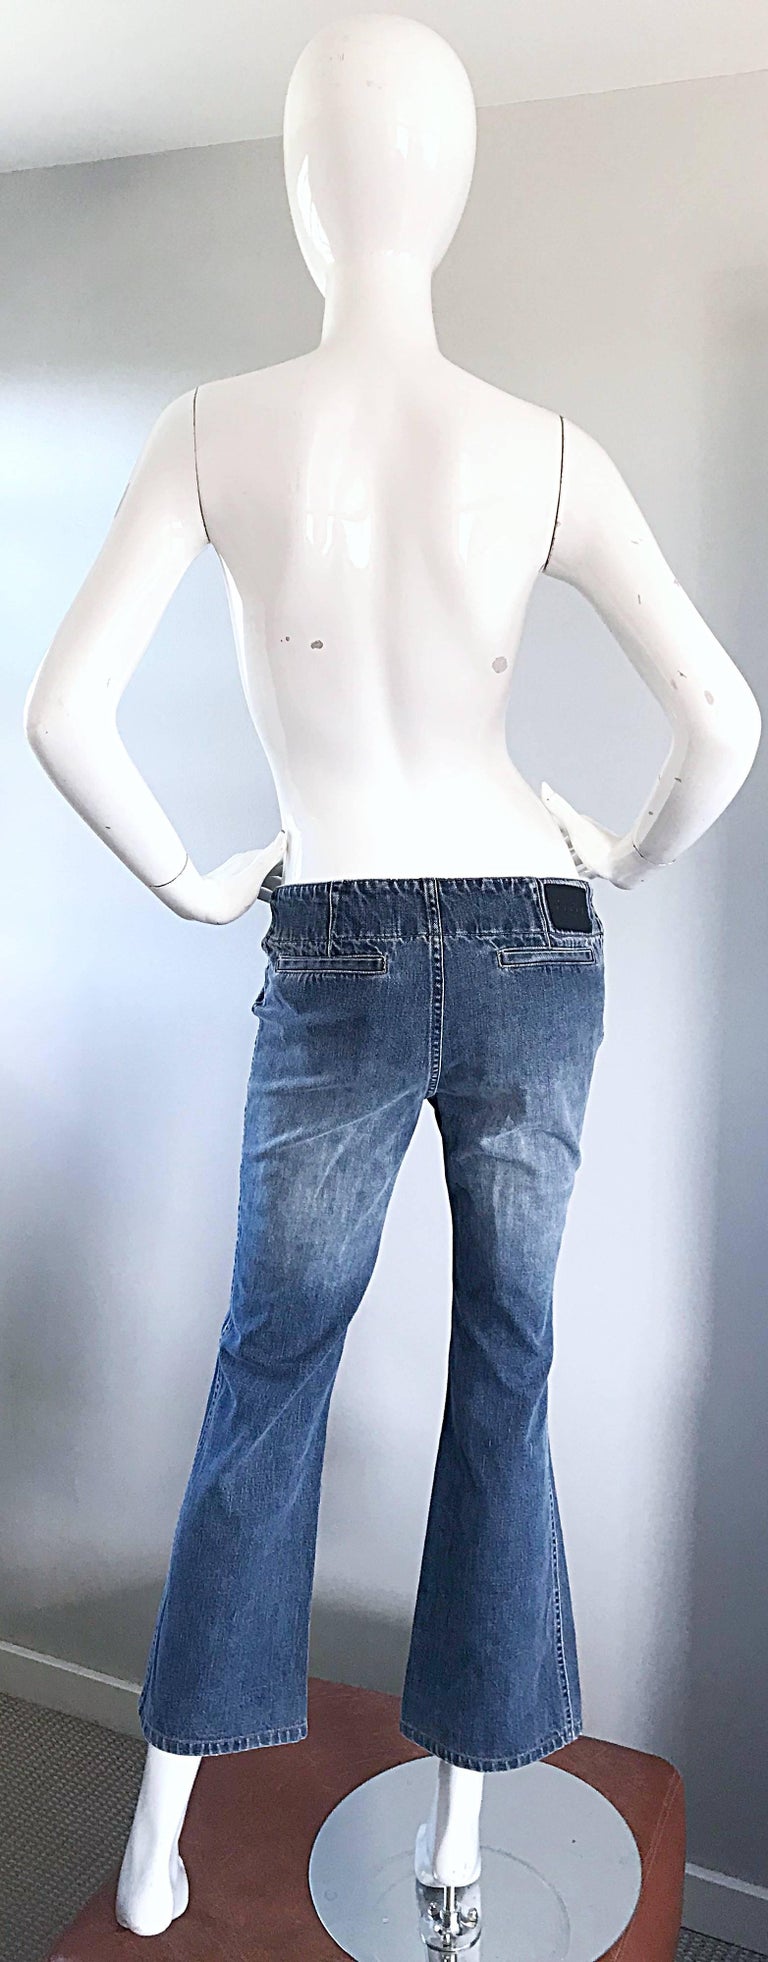 Tom Ford for Gucci Size 6 Low Rise Blue Jeans Denim Flare Leg Cropped ...